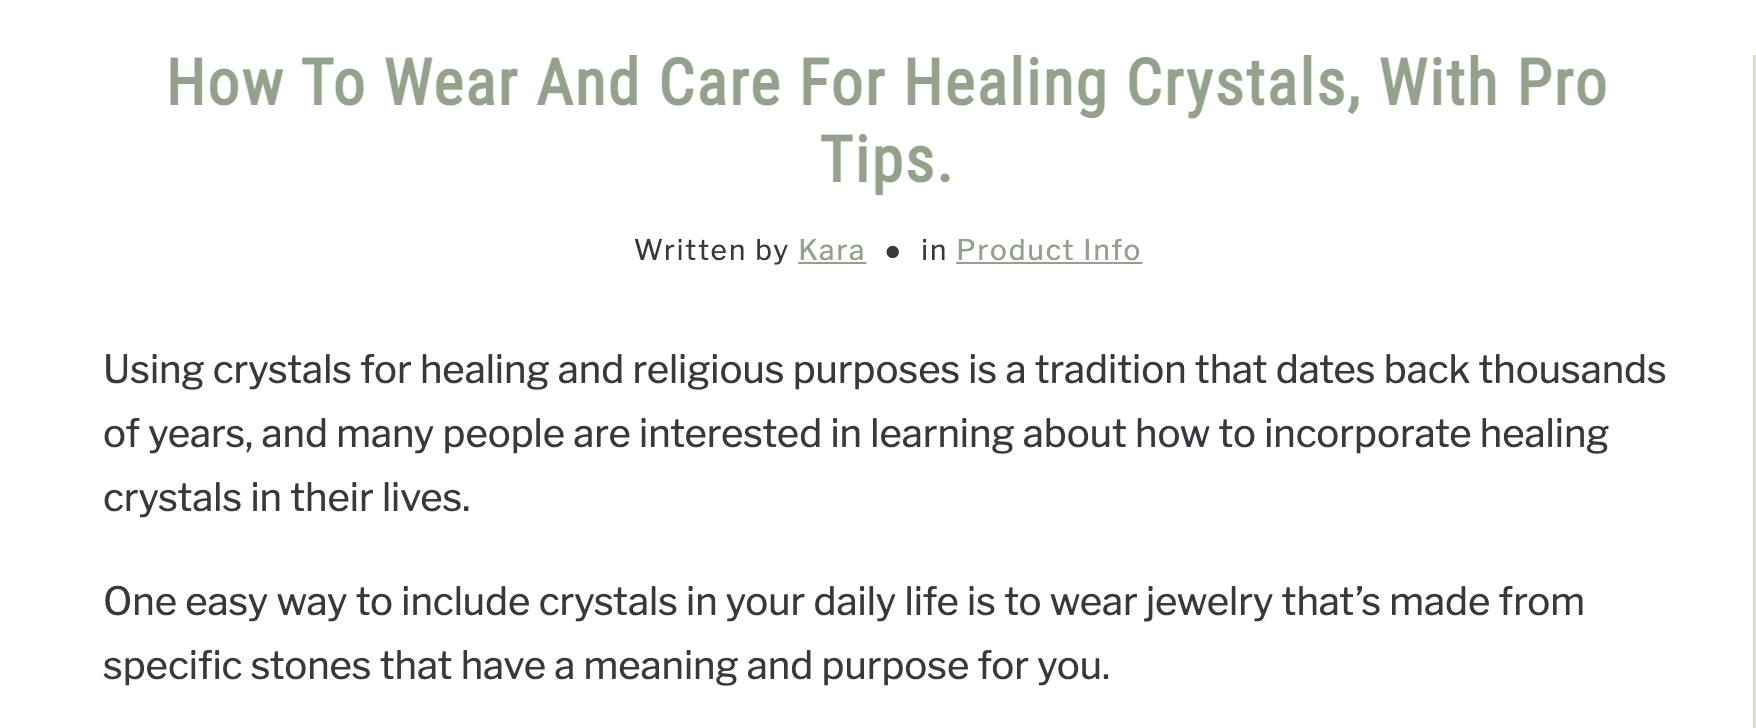 How to care and wear crystals